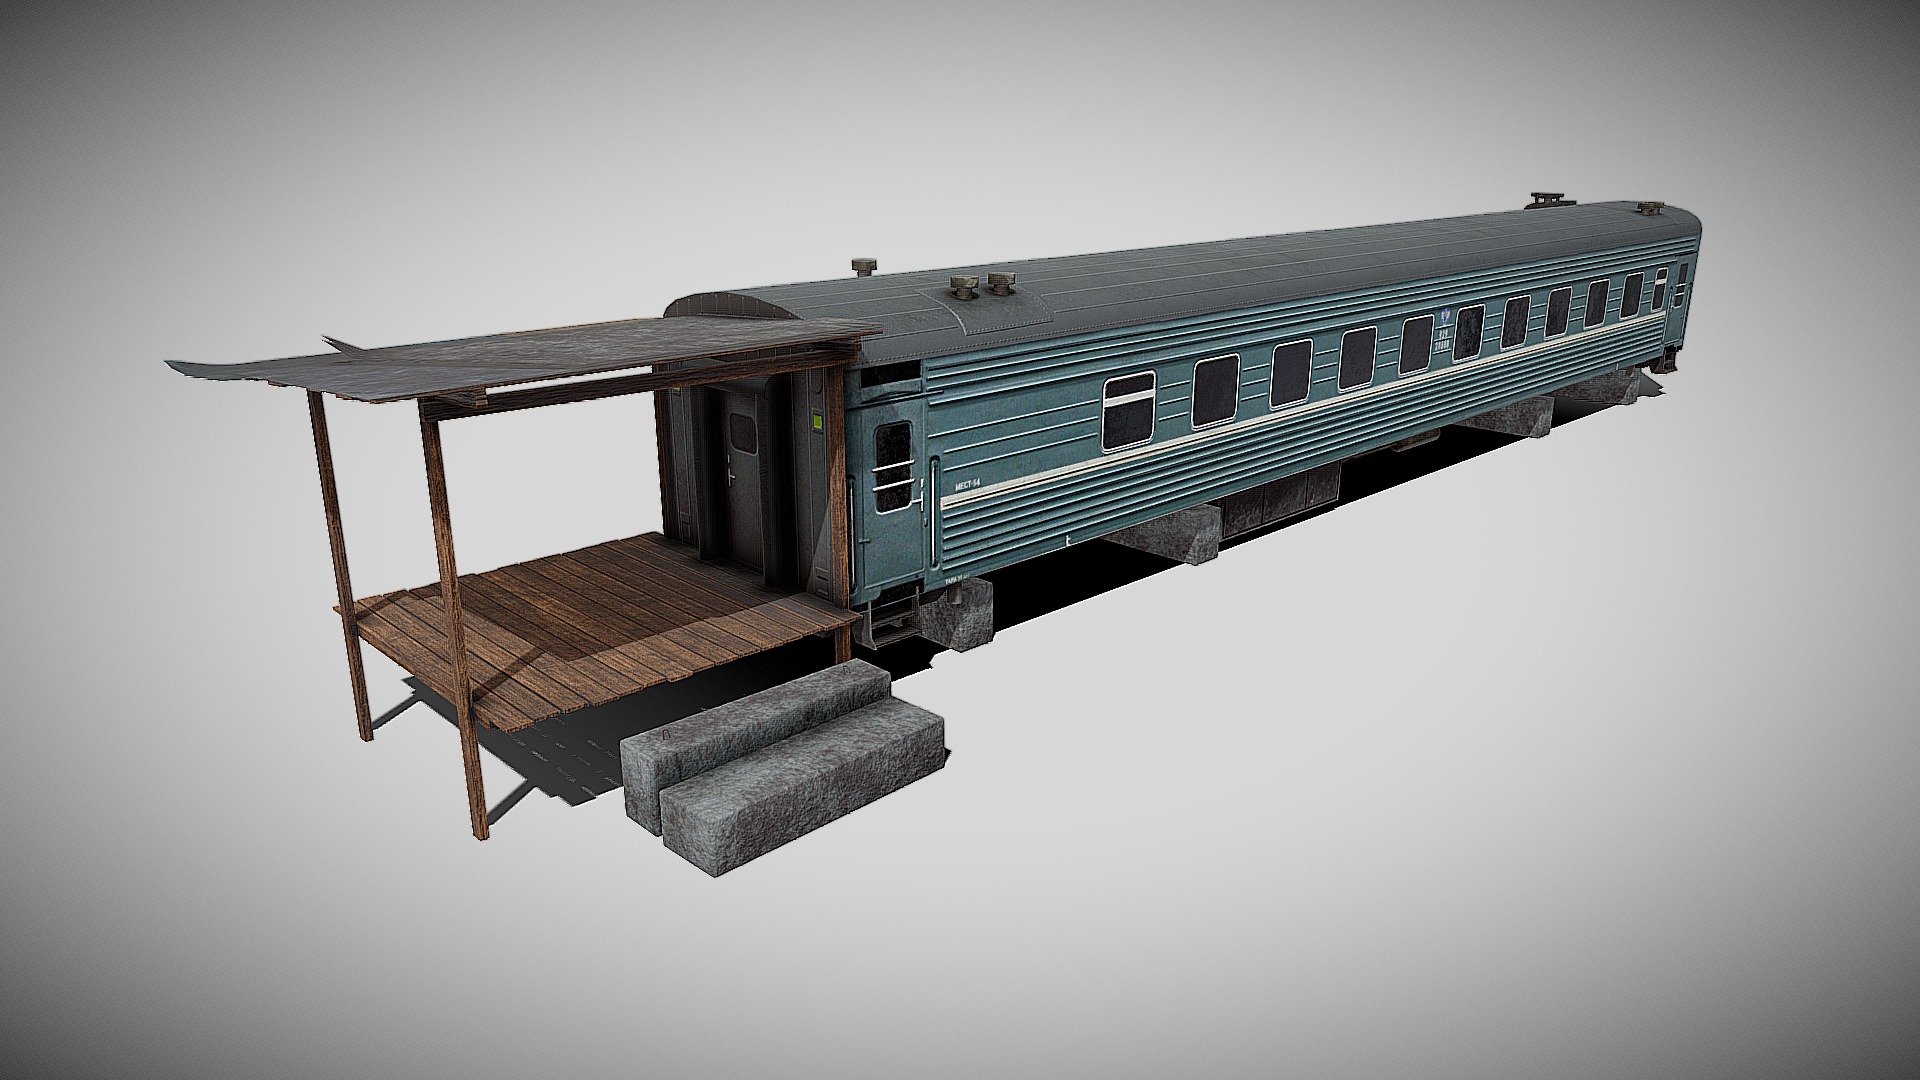 Abandoned house made from a train car. The game model is perfect for the background. The model has no interior 3d model